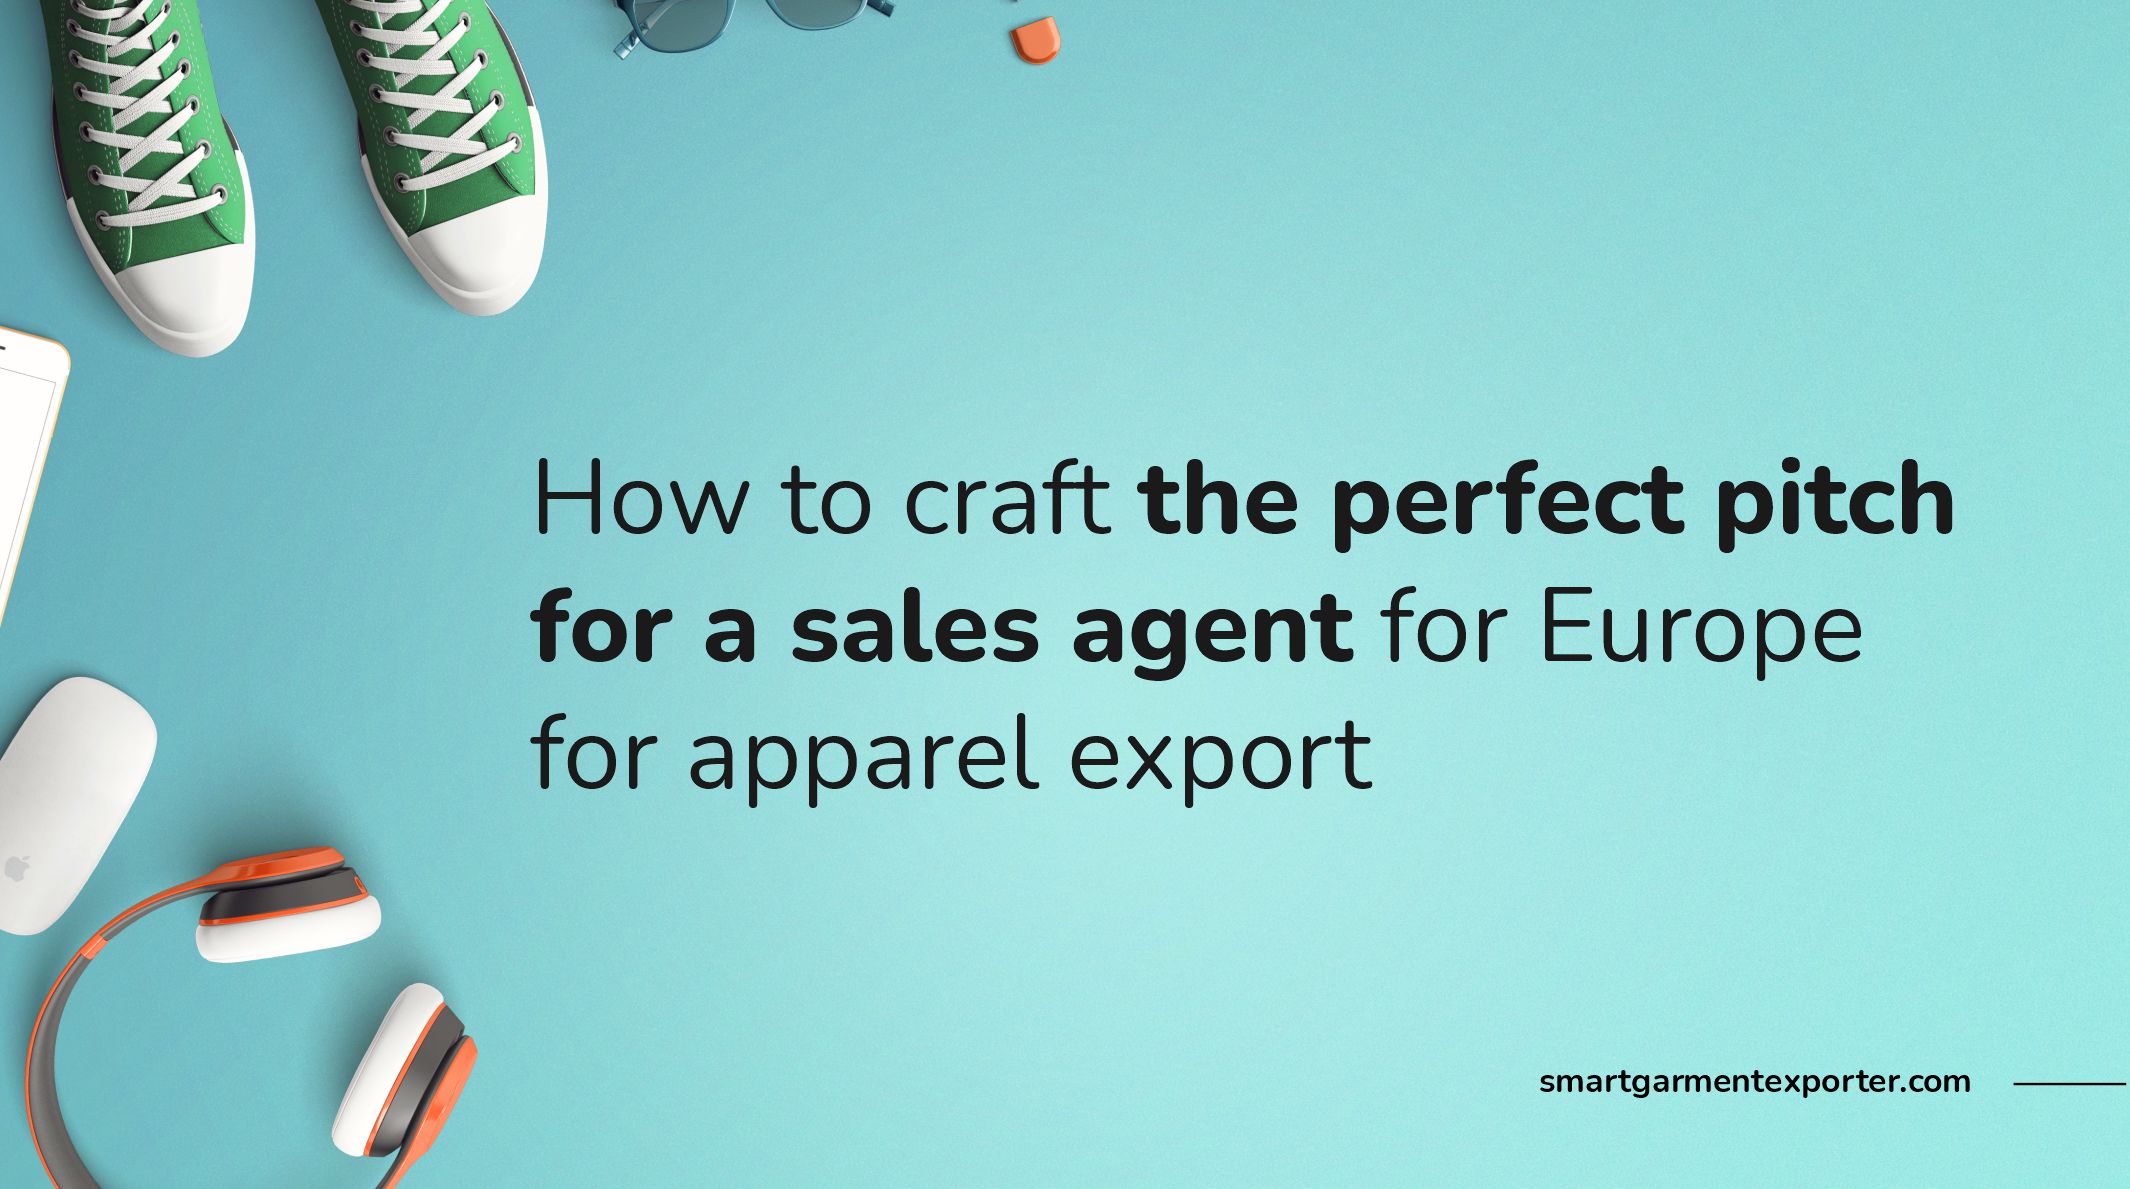 How to craft the perfect pitch for a sales agent for Europe